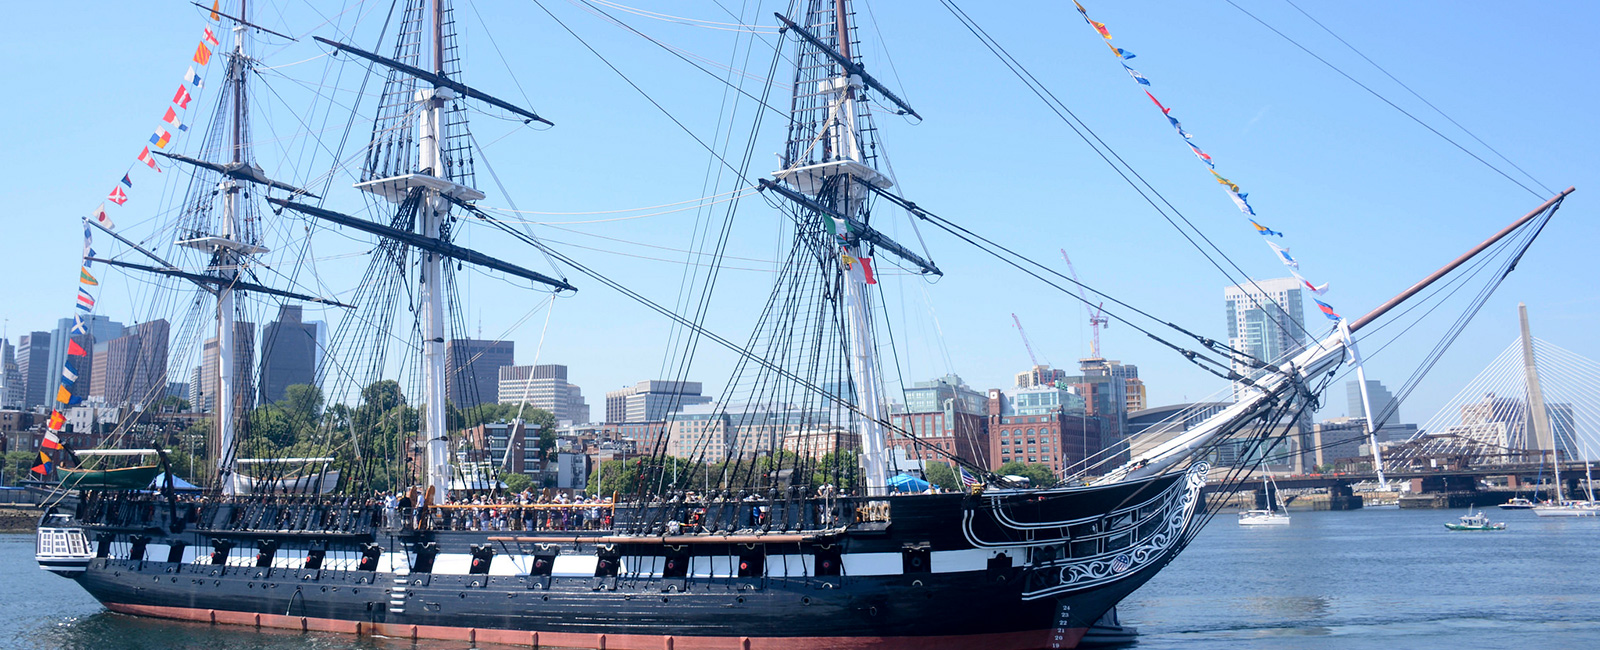 USS Constitution is tugged through Boston Harbor to Fort Independence on Castle Island during ‘Old Ironsides' underway commemorating Independence Day.